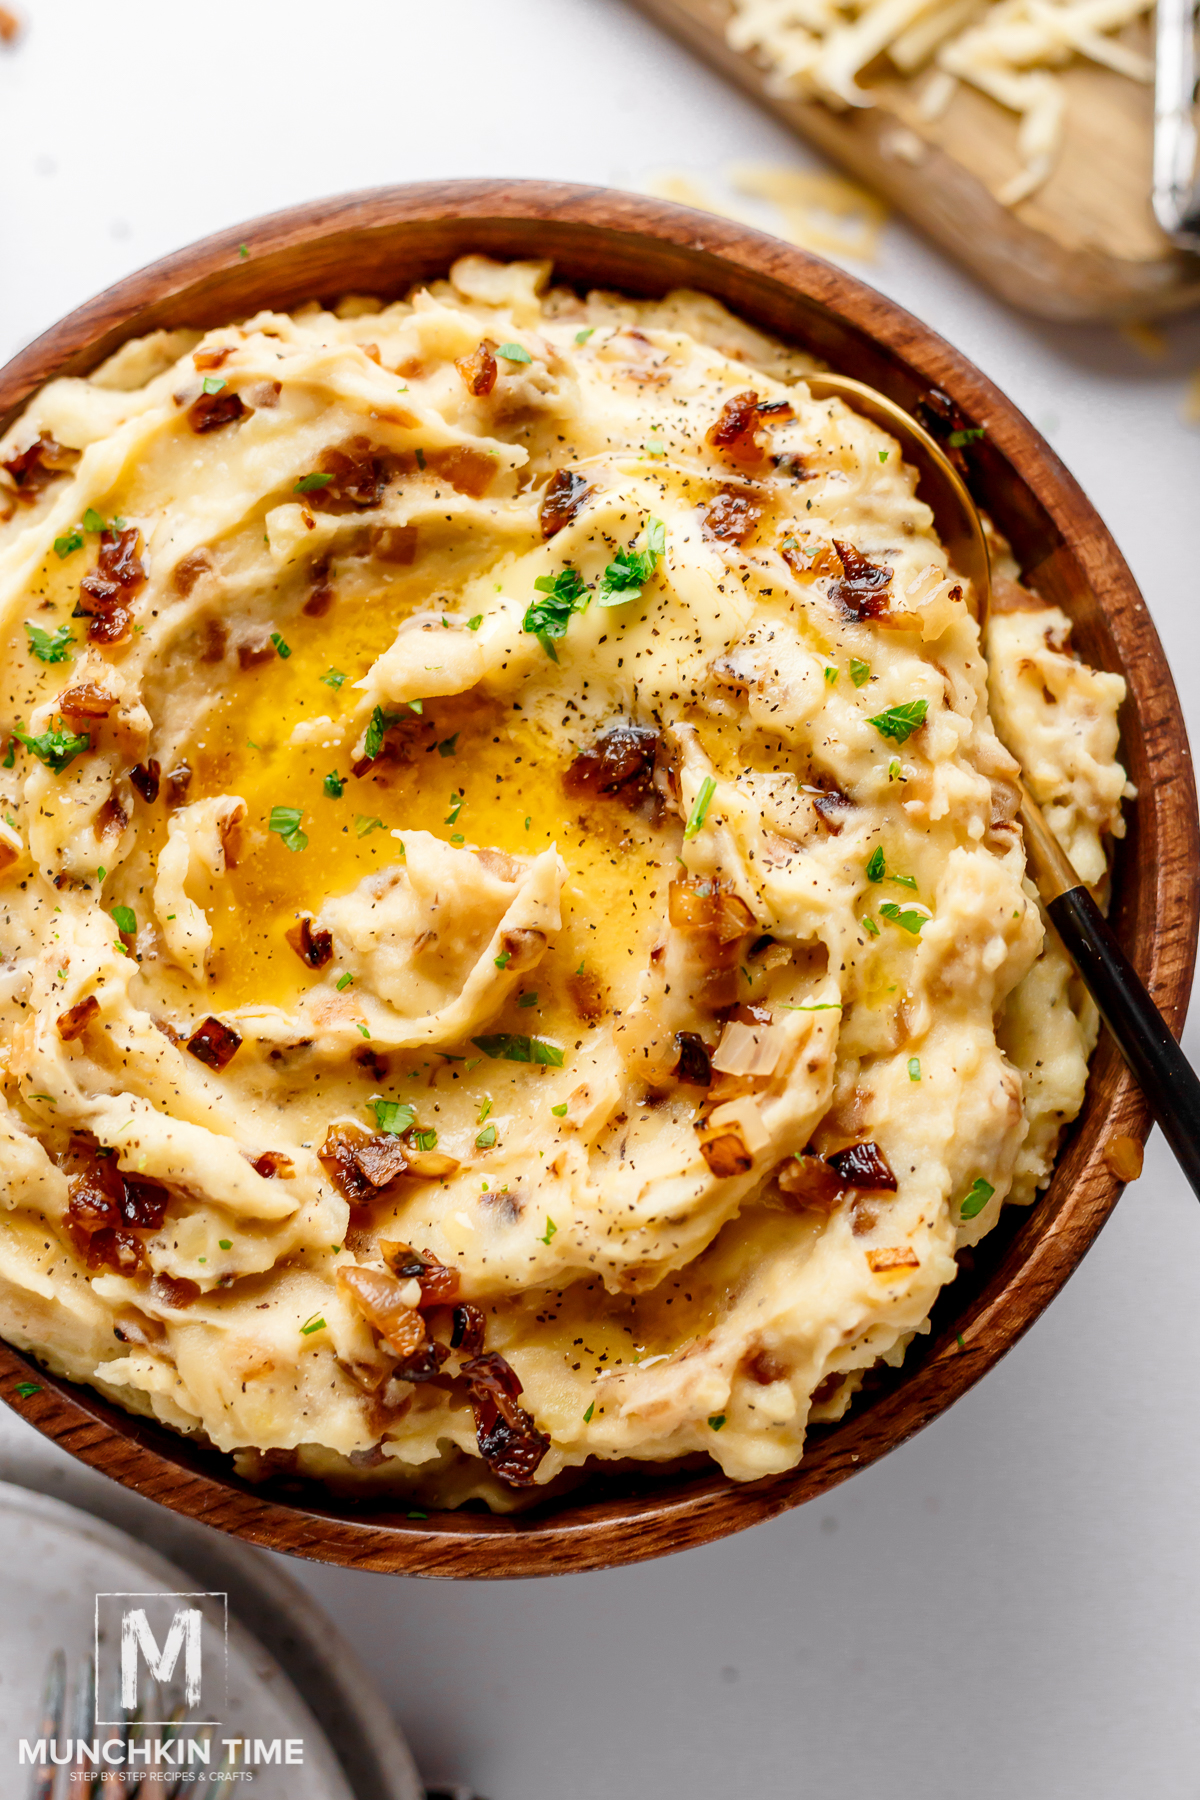 How to Make Cheesy Mashed Potatoes with Caramelized Onion